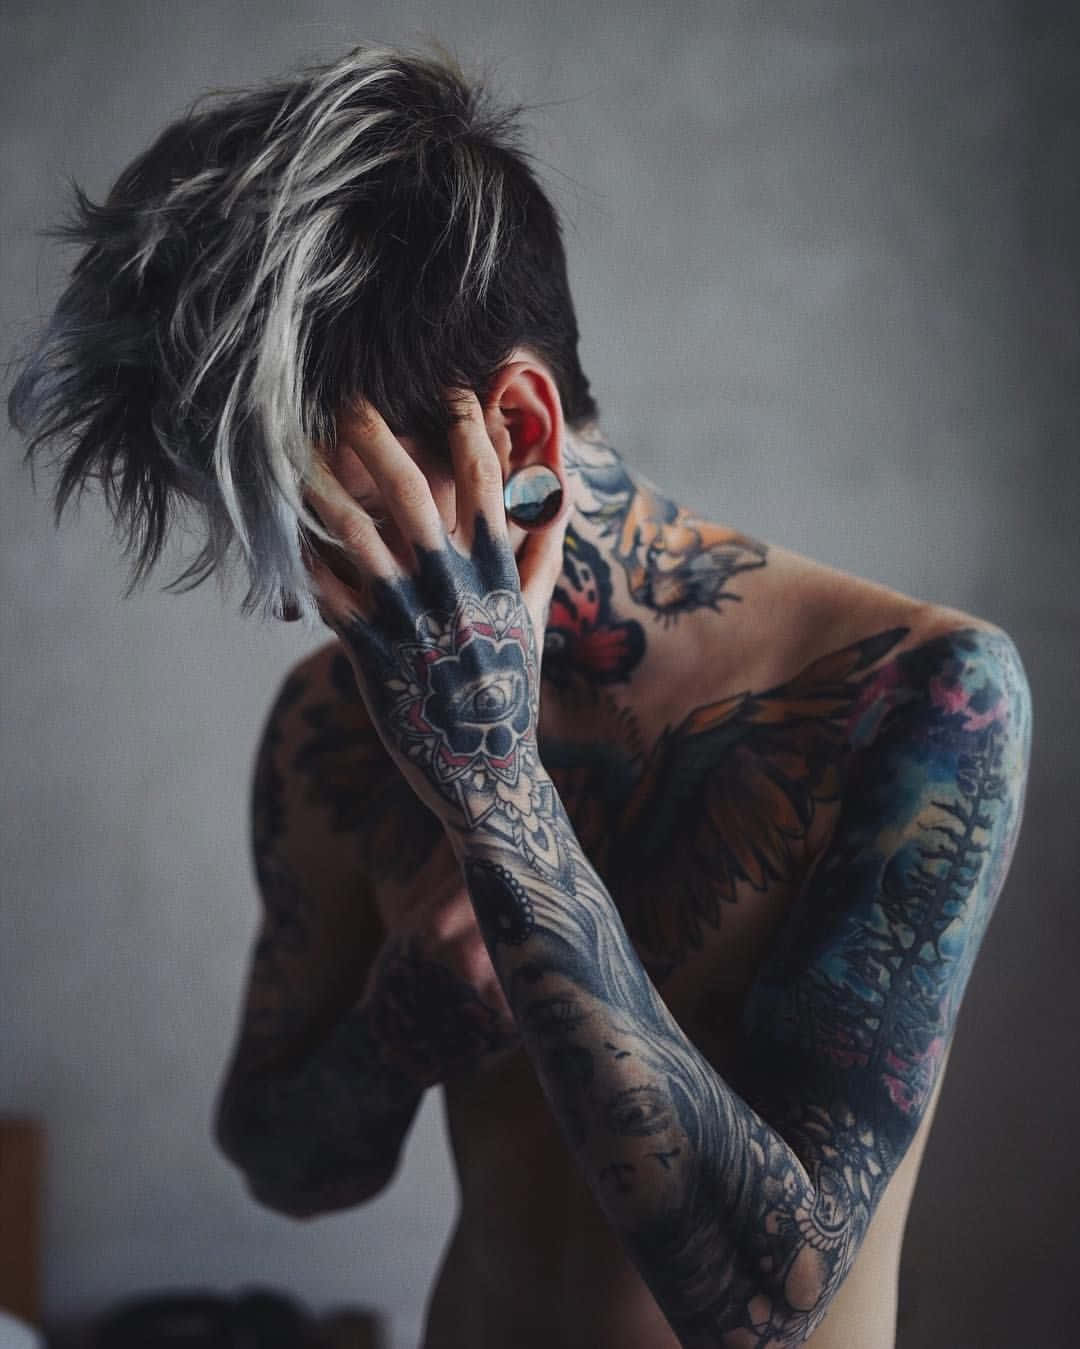 Tattooed Boy With A Smoldering Look